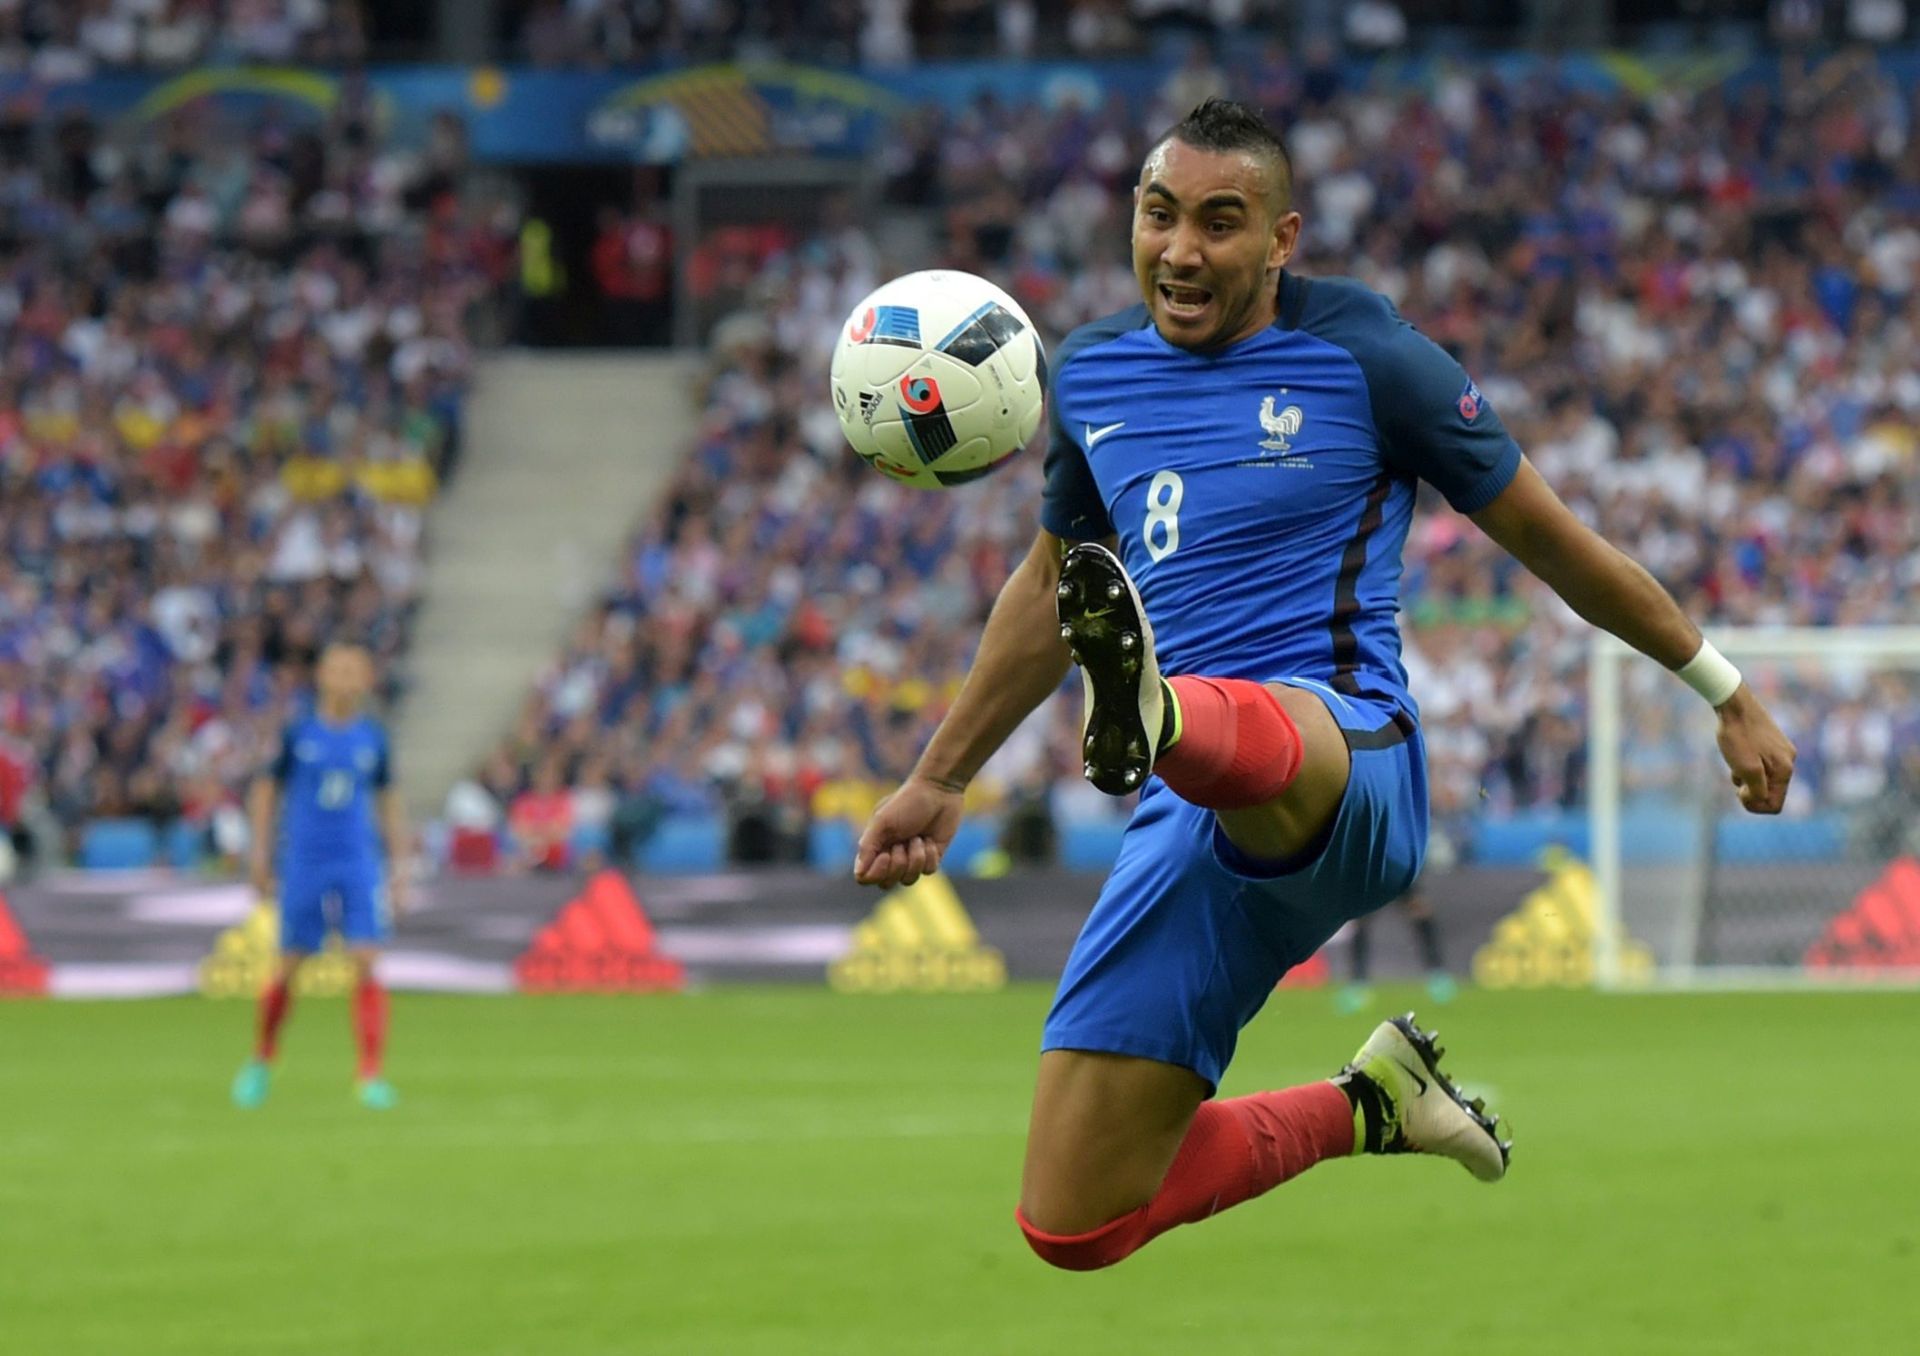 epa05355735 Dimitri Payet of France in action during the UEFA EURO 2016 group A preliminary round match between France and Romania at Stade de France in Saint-Denis, France, 10 June 2016.

(RESTRICTIONS APPLY: For editorial news reporting purposes only. Not used for commercial or marketing purposes without prior written approval of UEFA. Images must appear as still images and must not emulate match action video footage. Photographs published in online publications (whether via the Internet or otherwise) shall have an interval of at least 20 seconds between the posting.)  EPA/GEORGI LICOVSKI   EDITORIAL USE ONLY